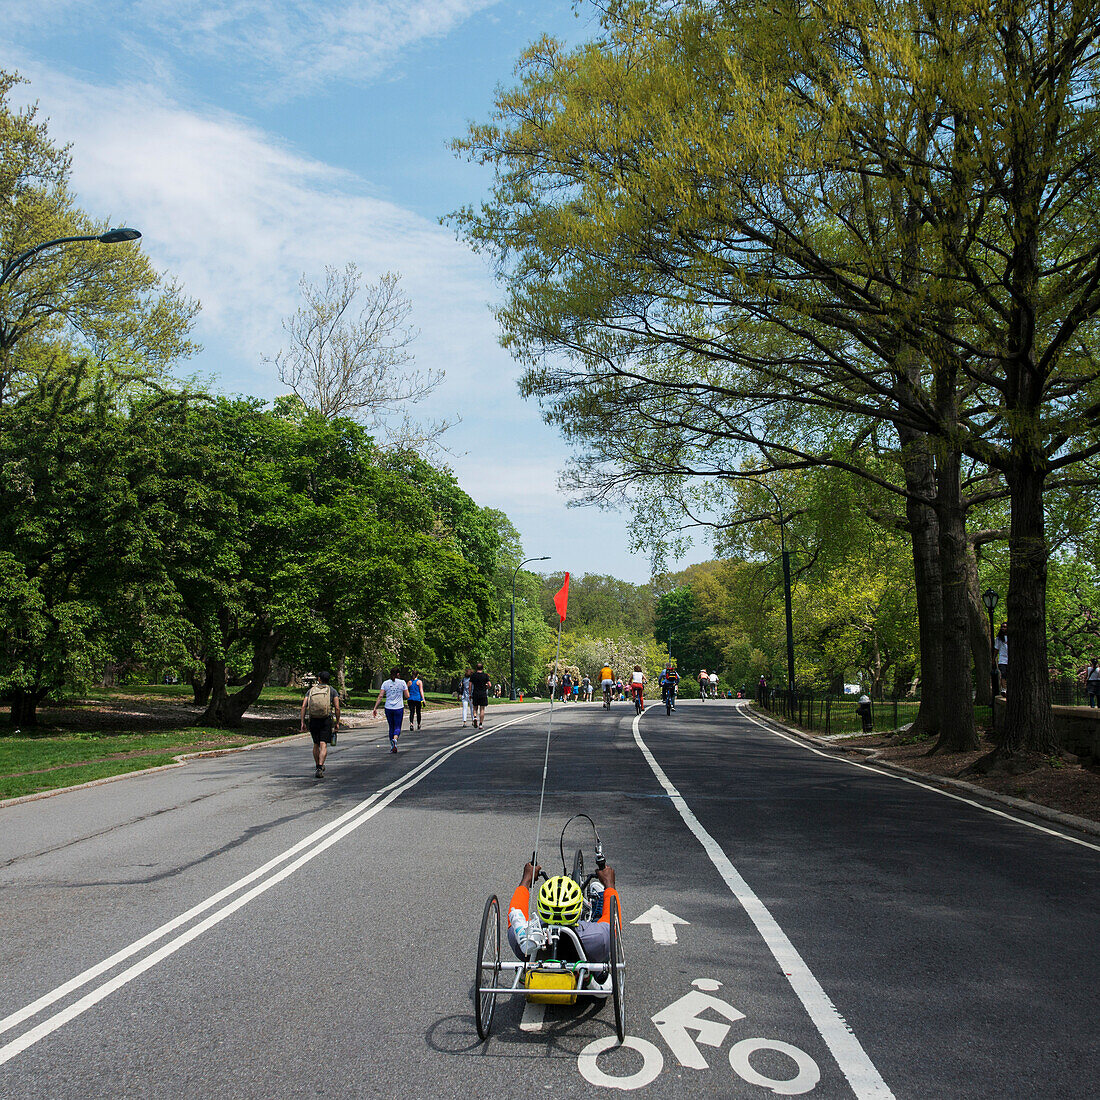 'Pedestrians, runners and cyclists on a park path; New York City, New York, United States of America'